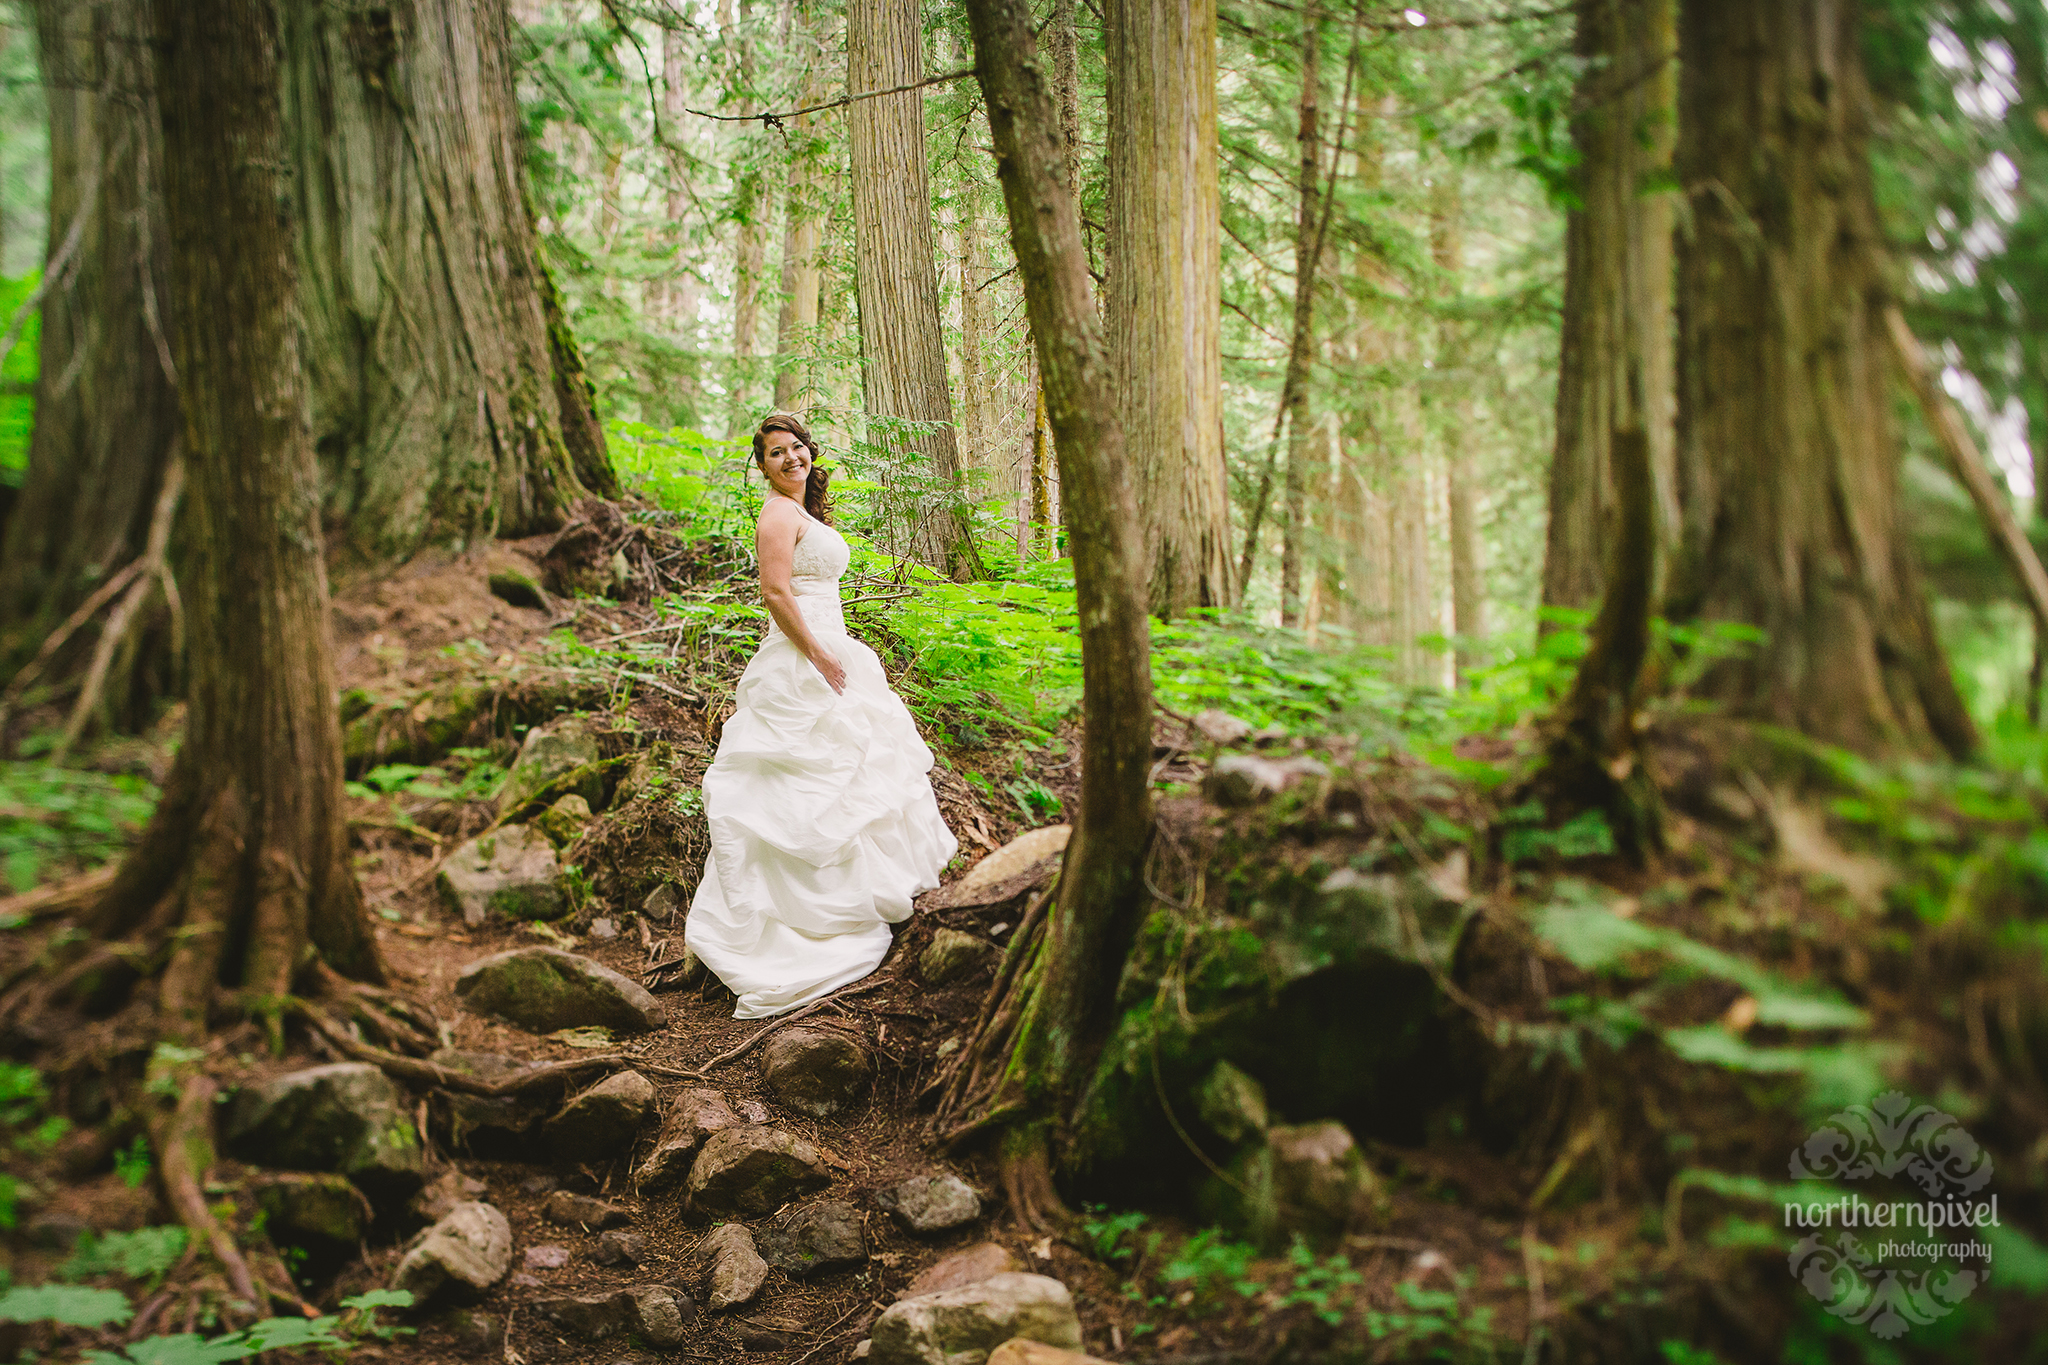 Ancient Forest Wedding | Northern Pixel Photography